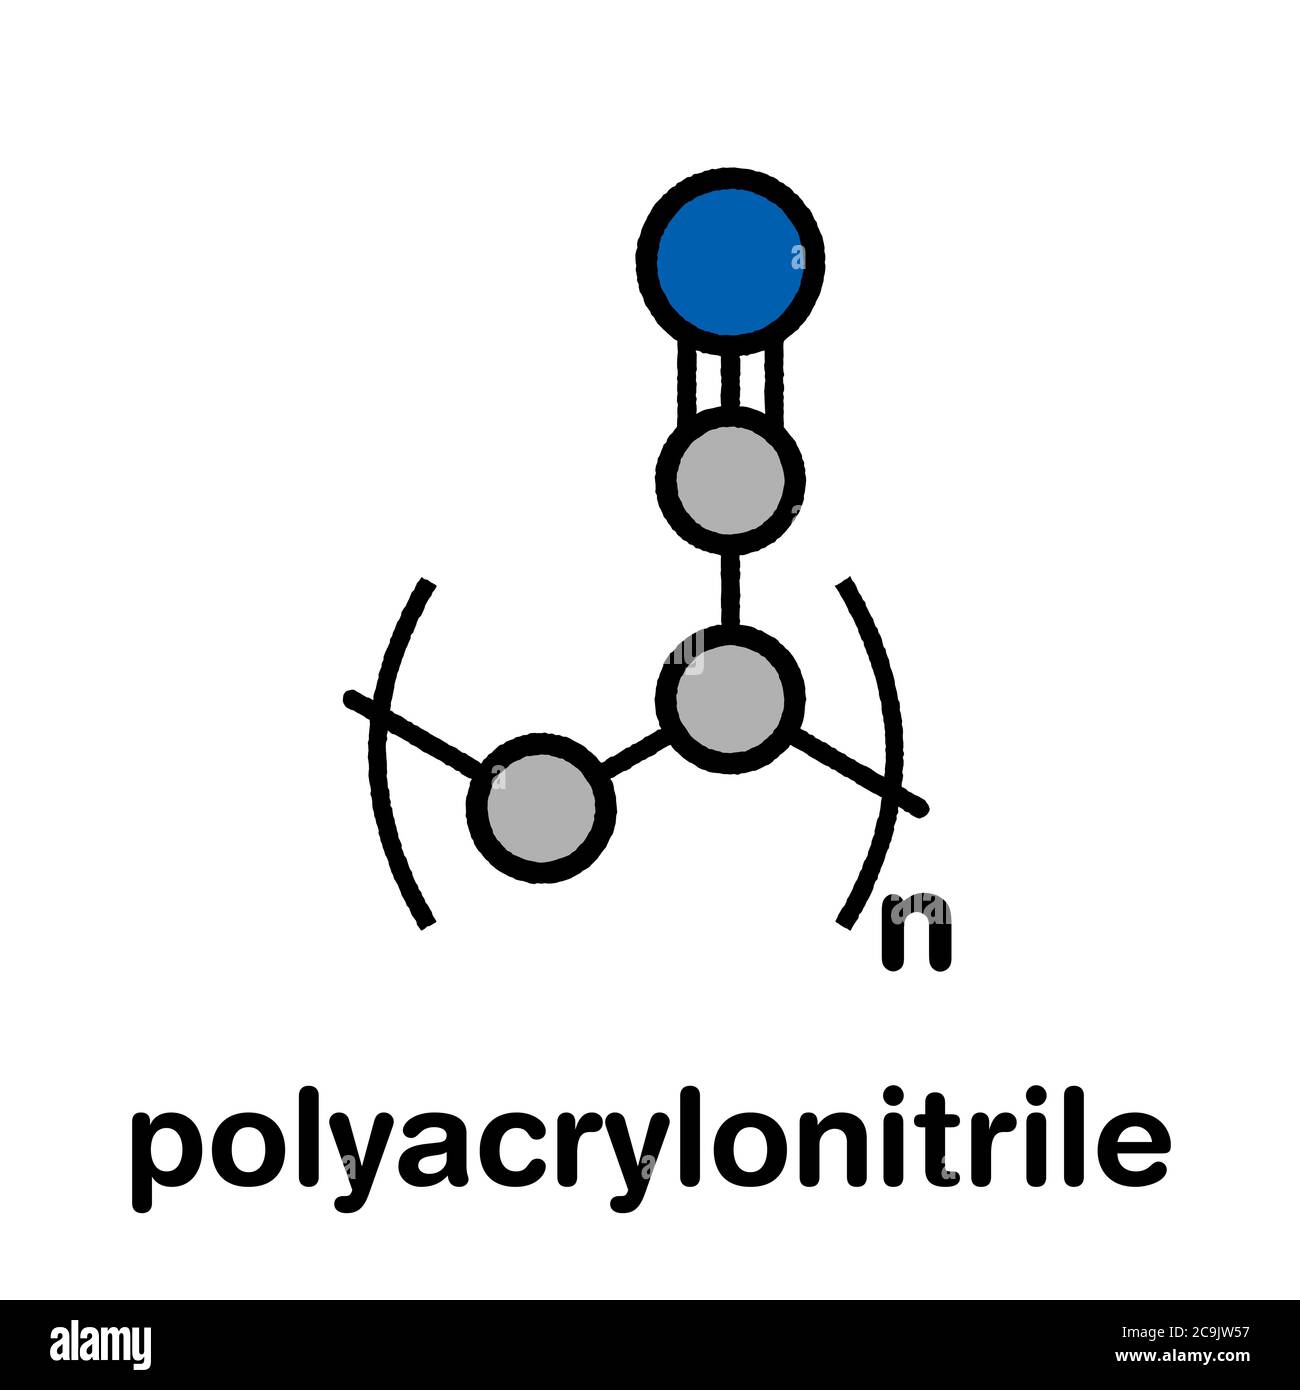 Polyacrylonitrile (PAN) polymer, chemical structure. Stylized skeletal formula: Atoms are shown as color-coded circles with thick black outlines and b Stock Photo